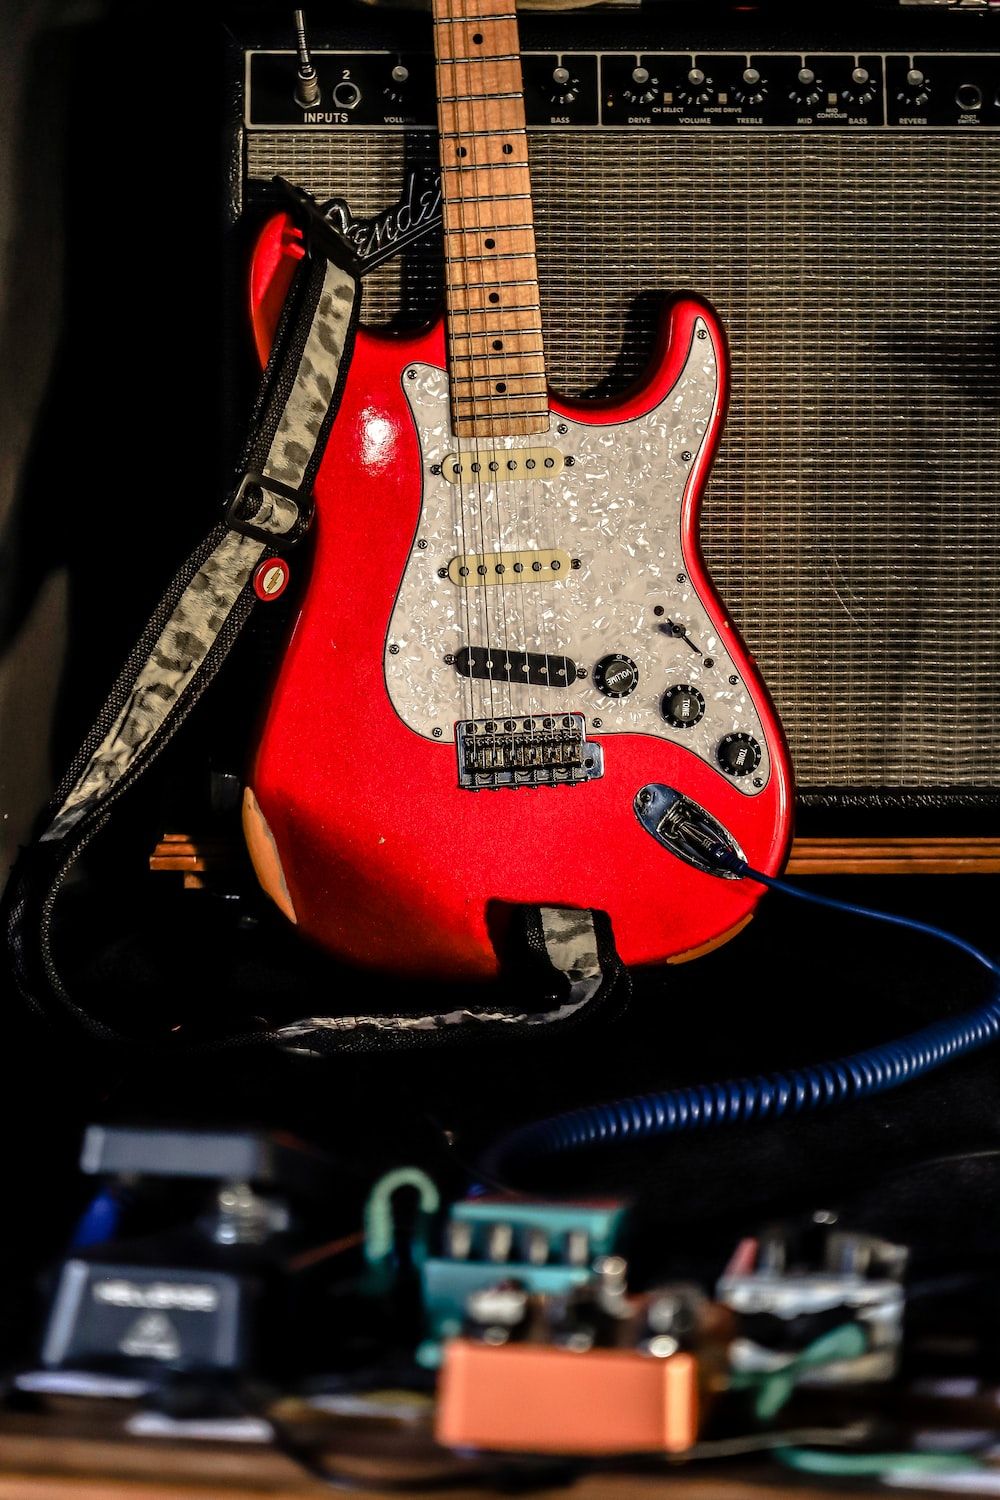 A red electric guitar sitting on a black guitar case in front of a black amplifier. - Guitar